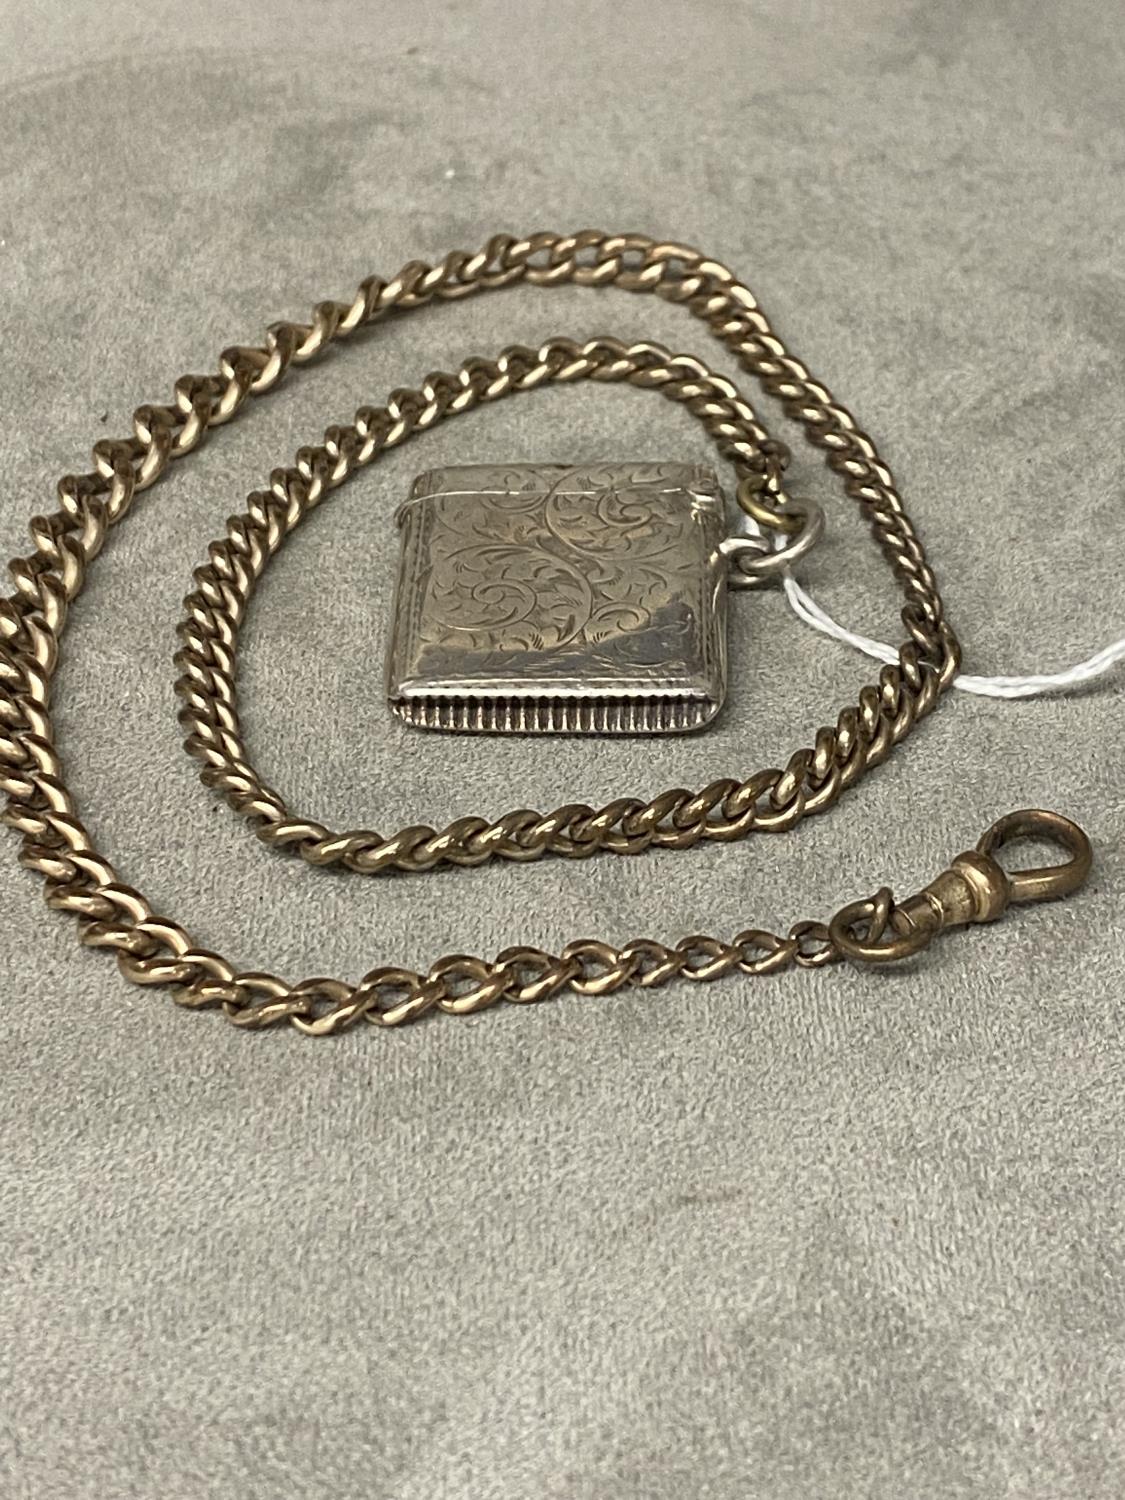 Stirling silver vesta case with chased decoration, Birmingham 1901, white metal curb link chain - Image 2 of 3